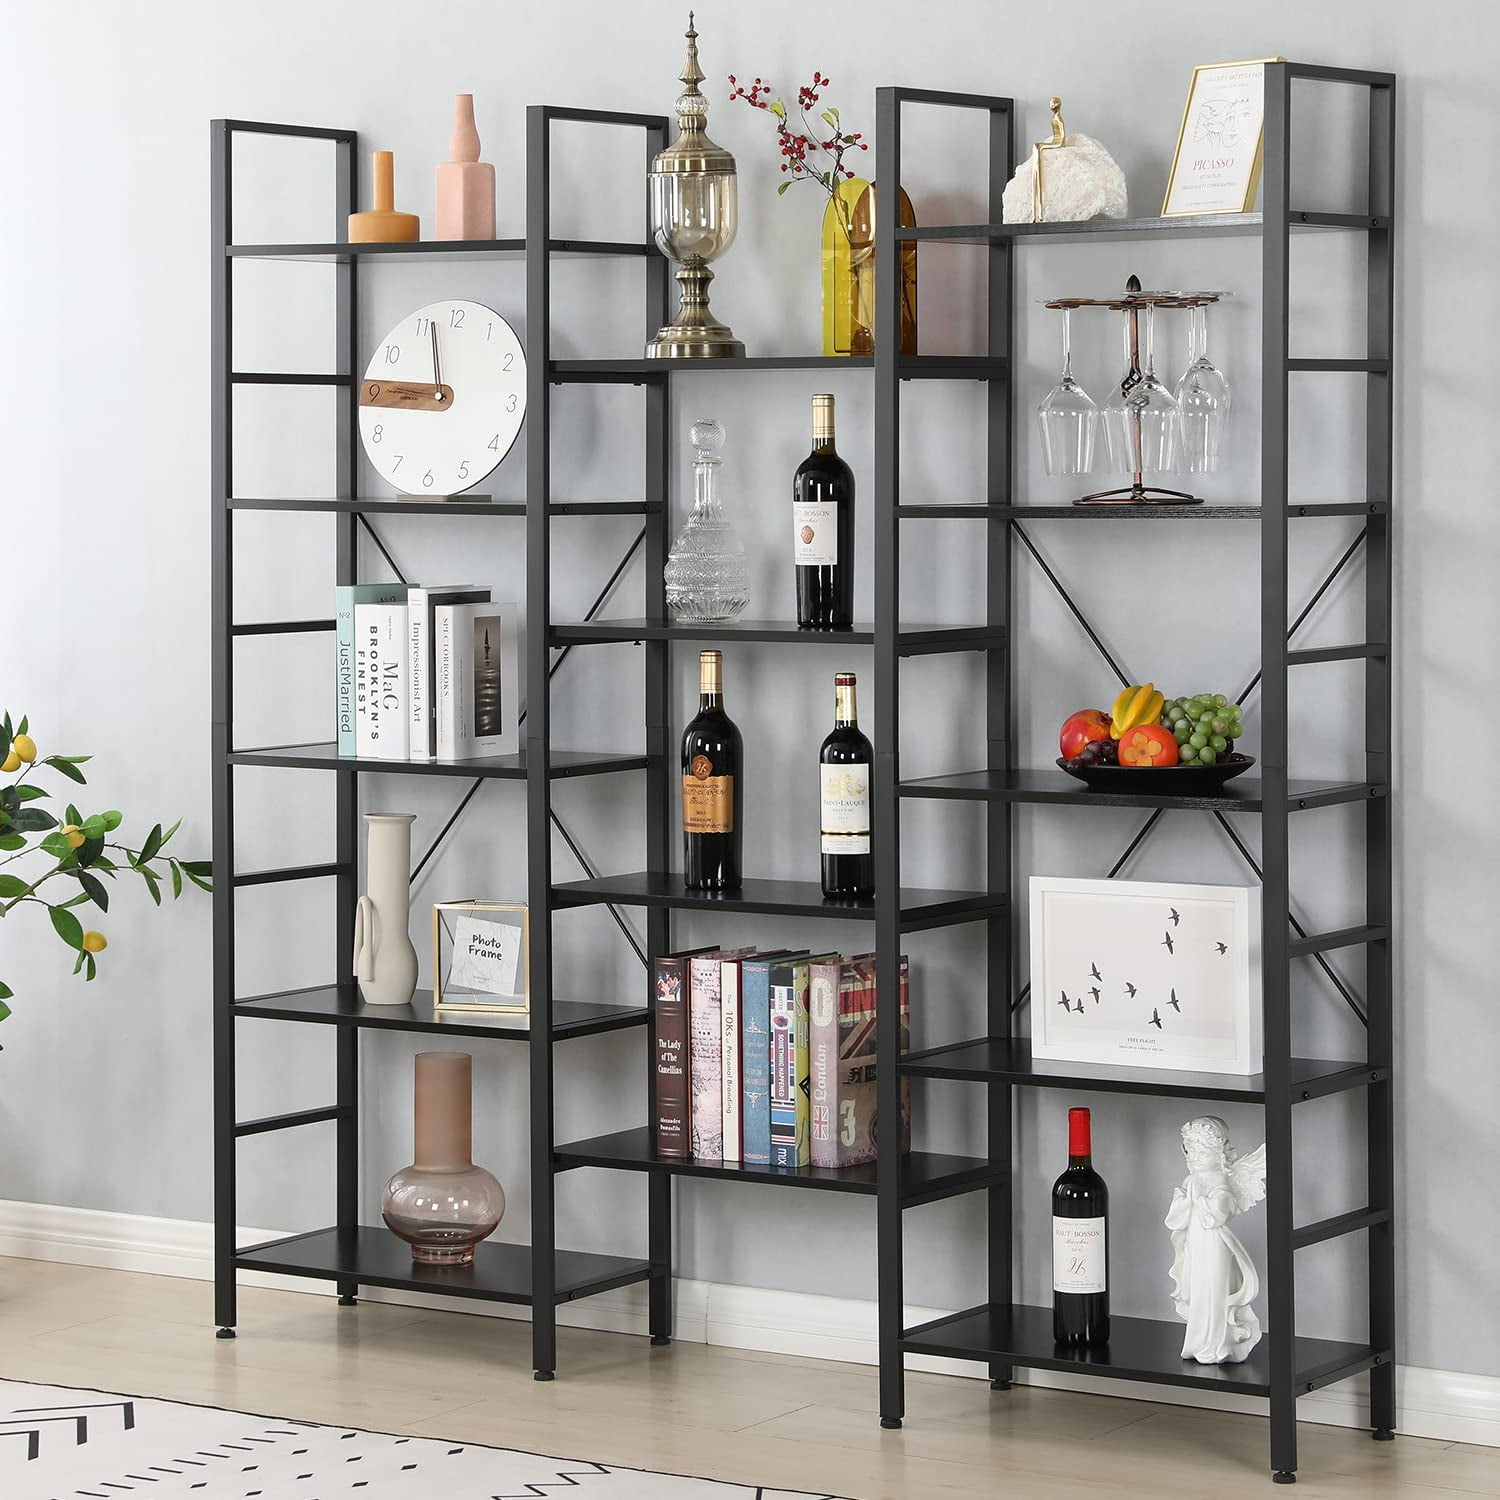 Erommy 5 Tier Industrial Bookshelf Triple Wide, 14 Display Cubes Organizer  with Antique Wood and Metal Frames, Black